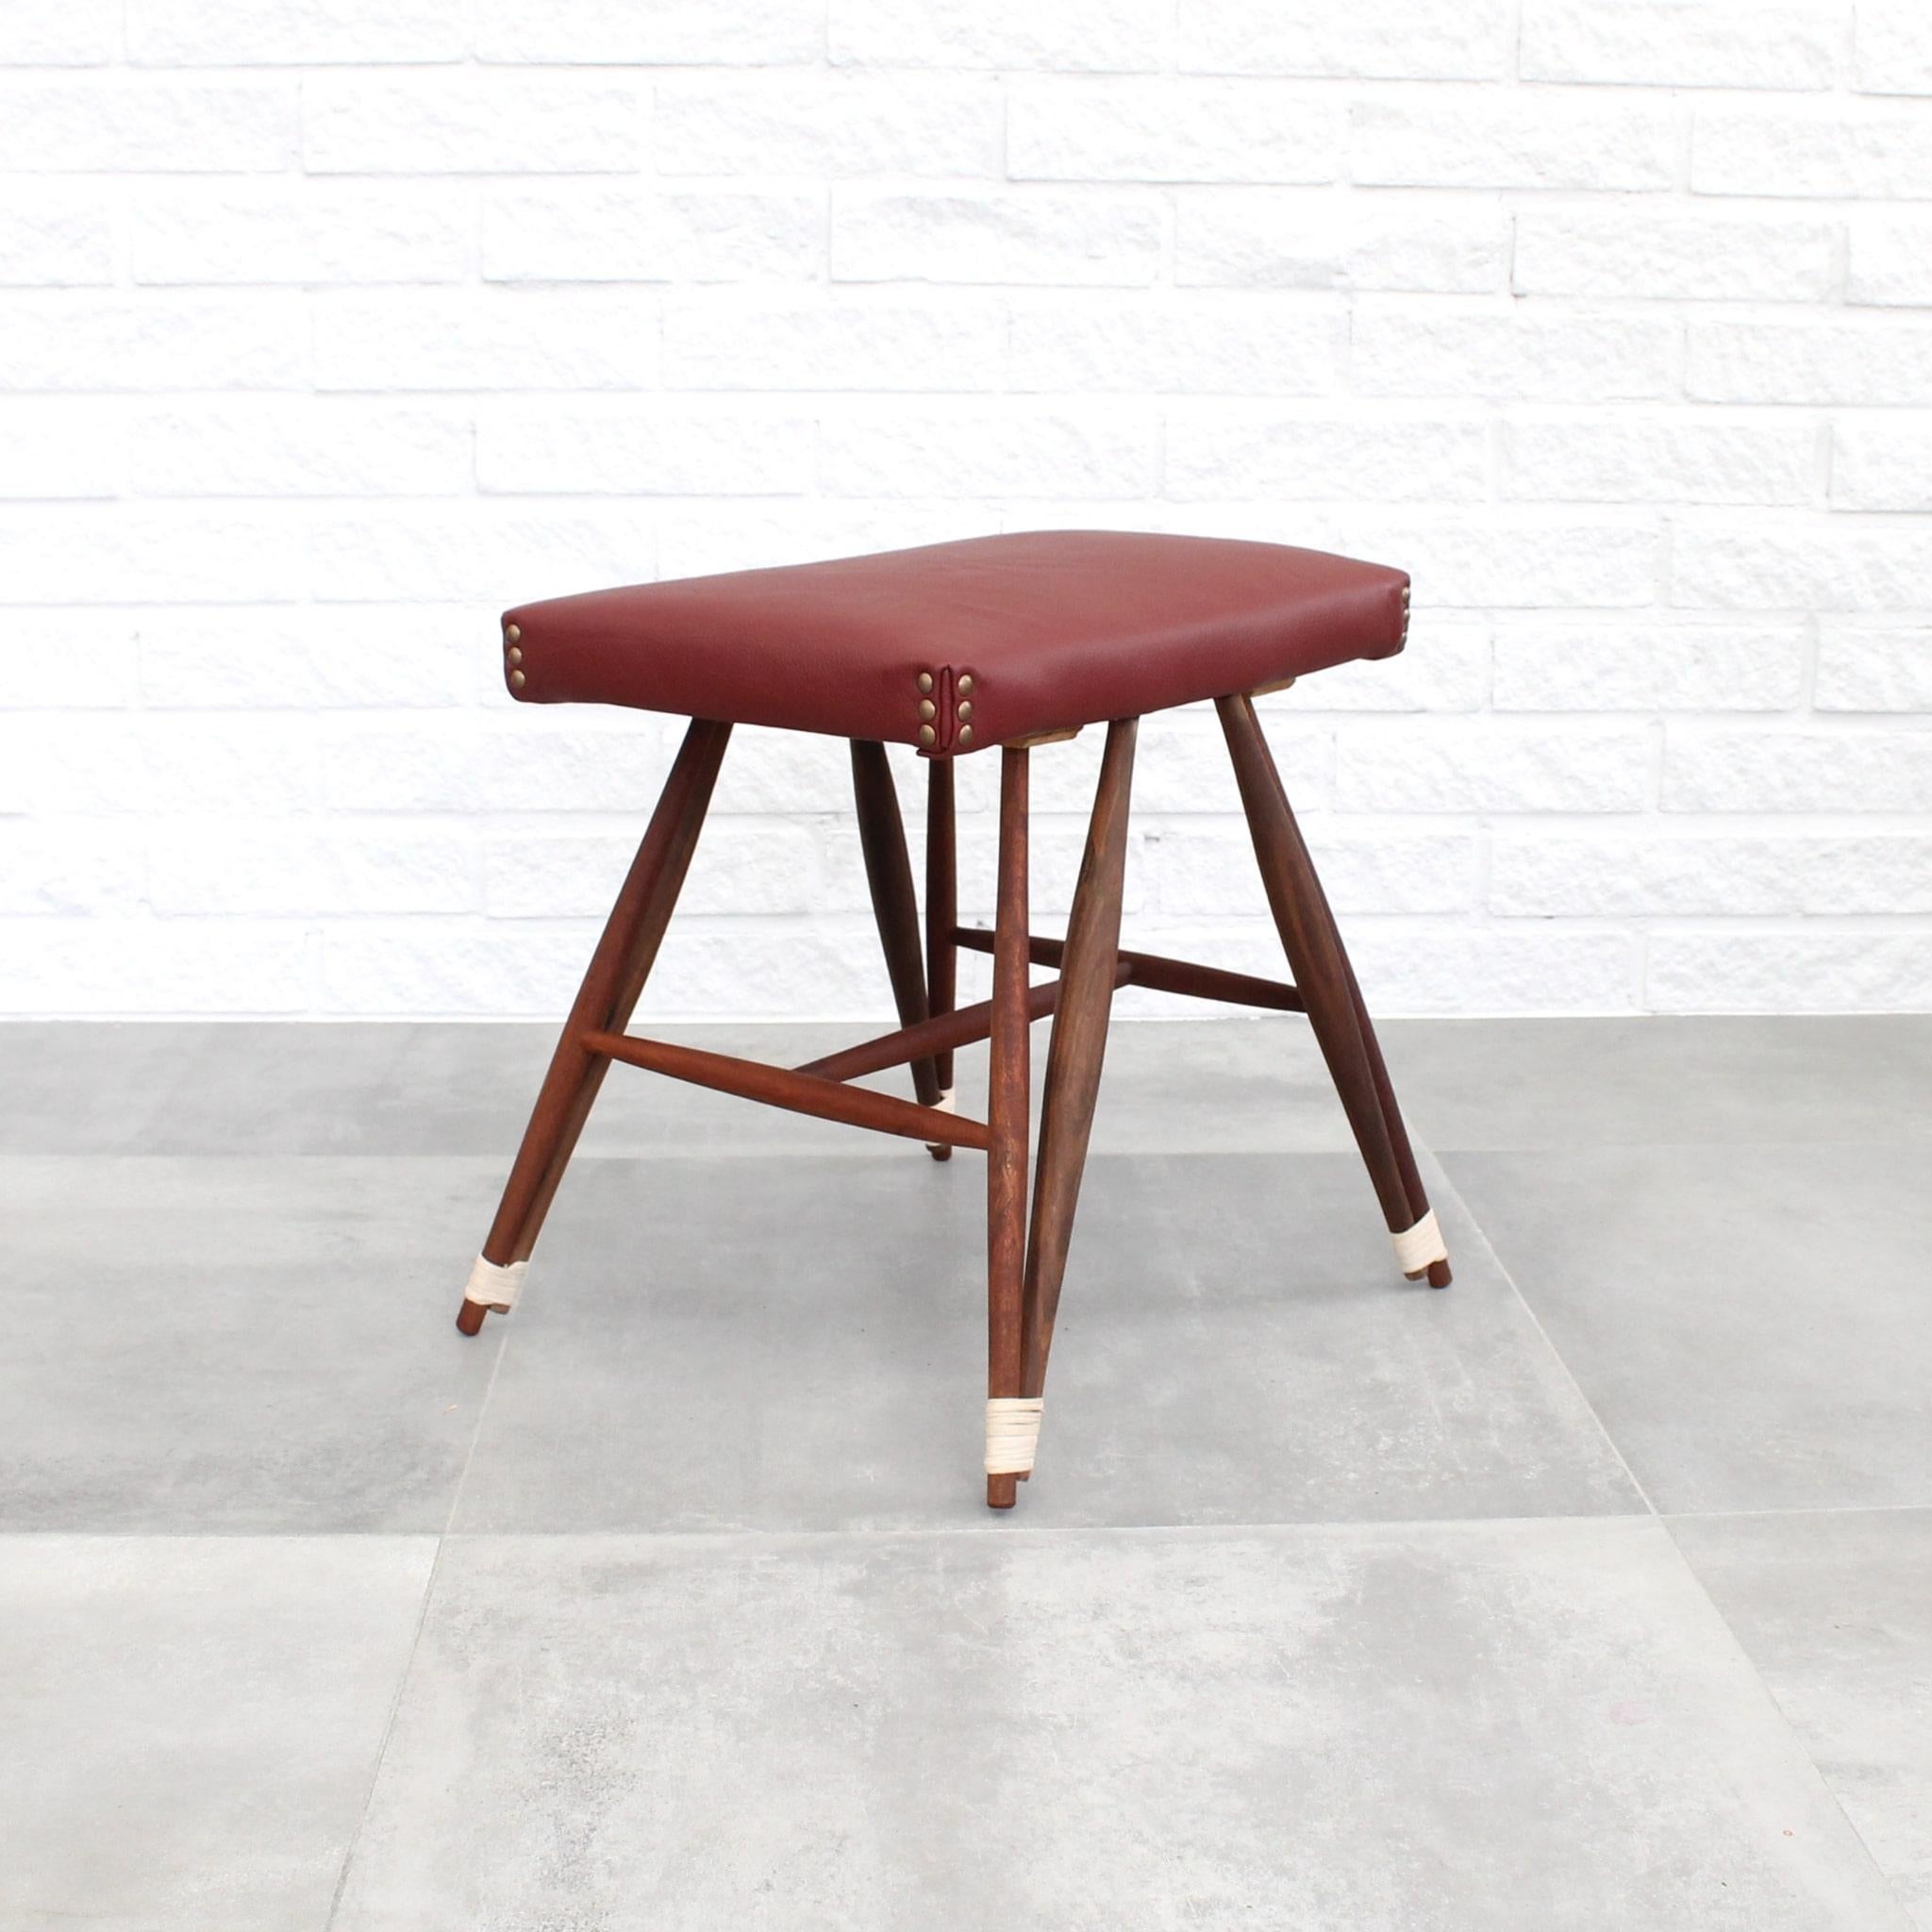 This unique Swedish stool features a solid walnut construction, complemented by red leather upholstery and distinctive rattan details around the legs. Notably, its characteristic Eiffel silhouette is achieved through the use of two wooden dowels for